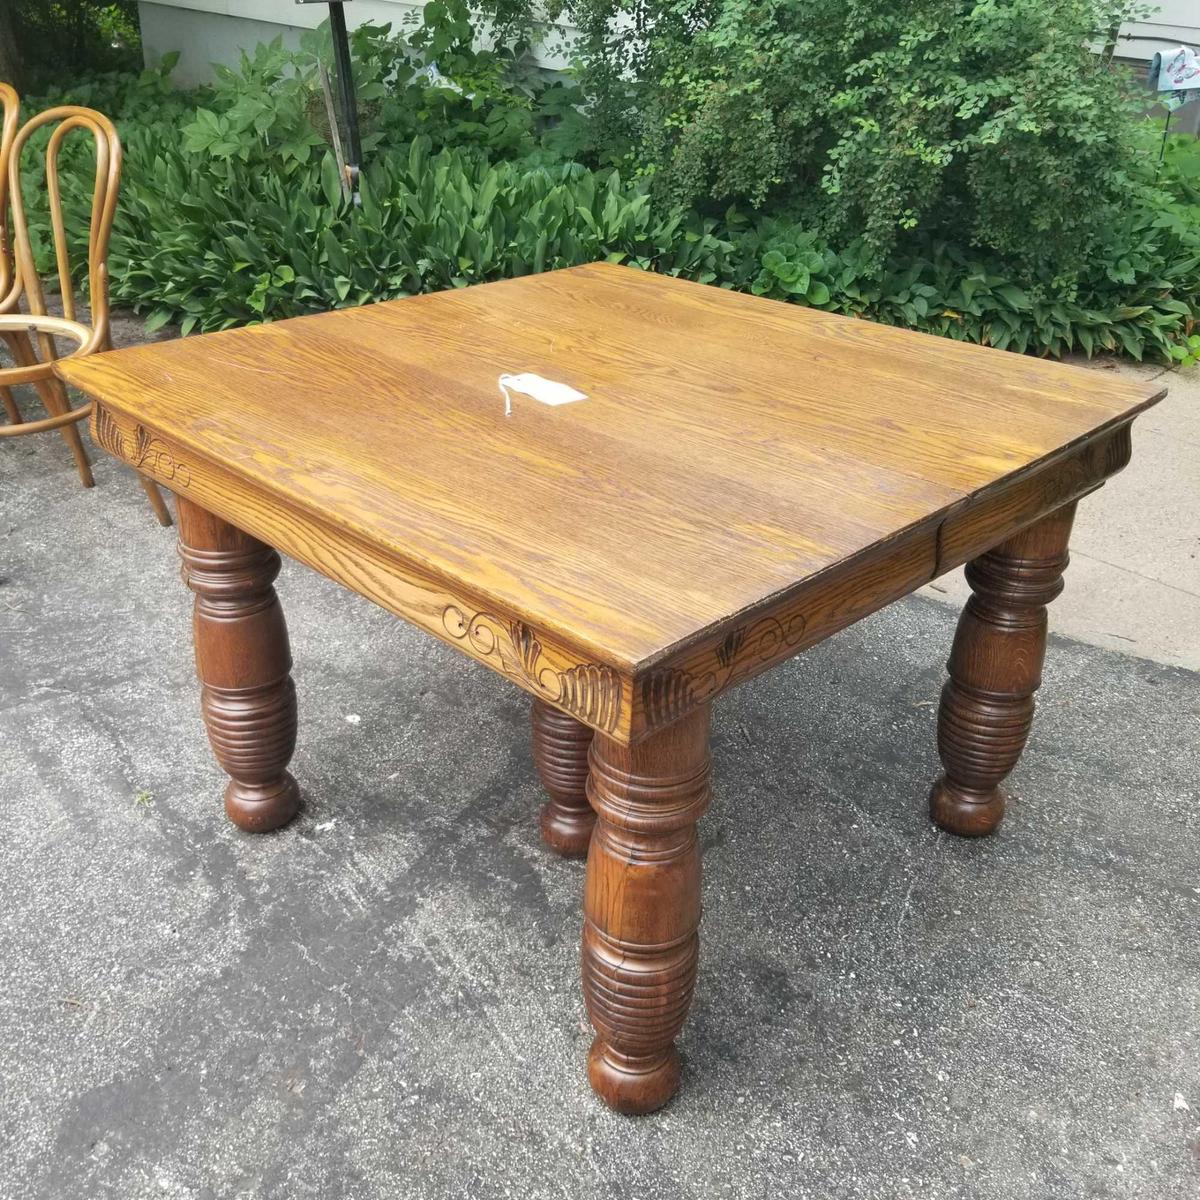 42" 5 Leg Banquet Table with 6 Leaves